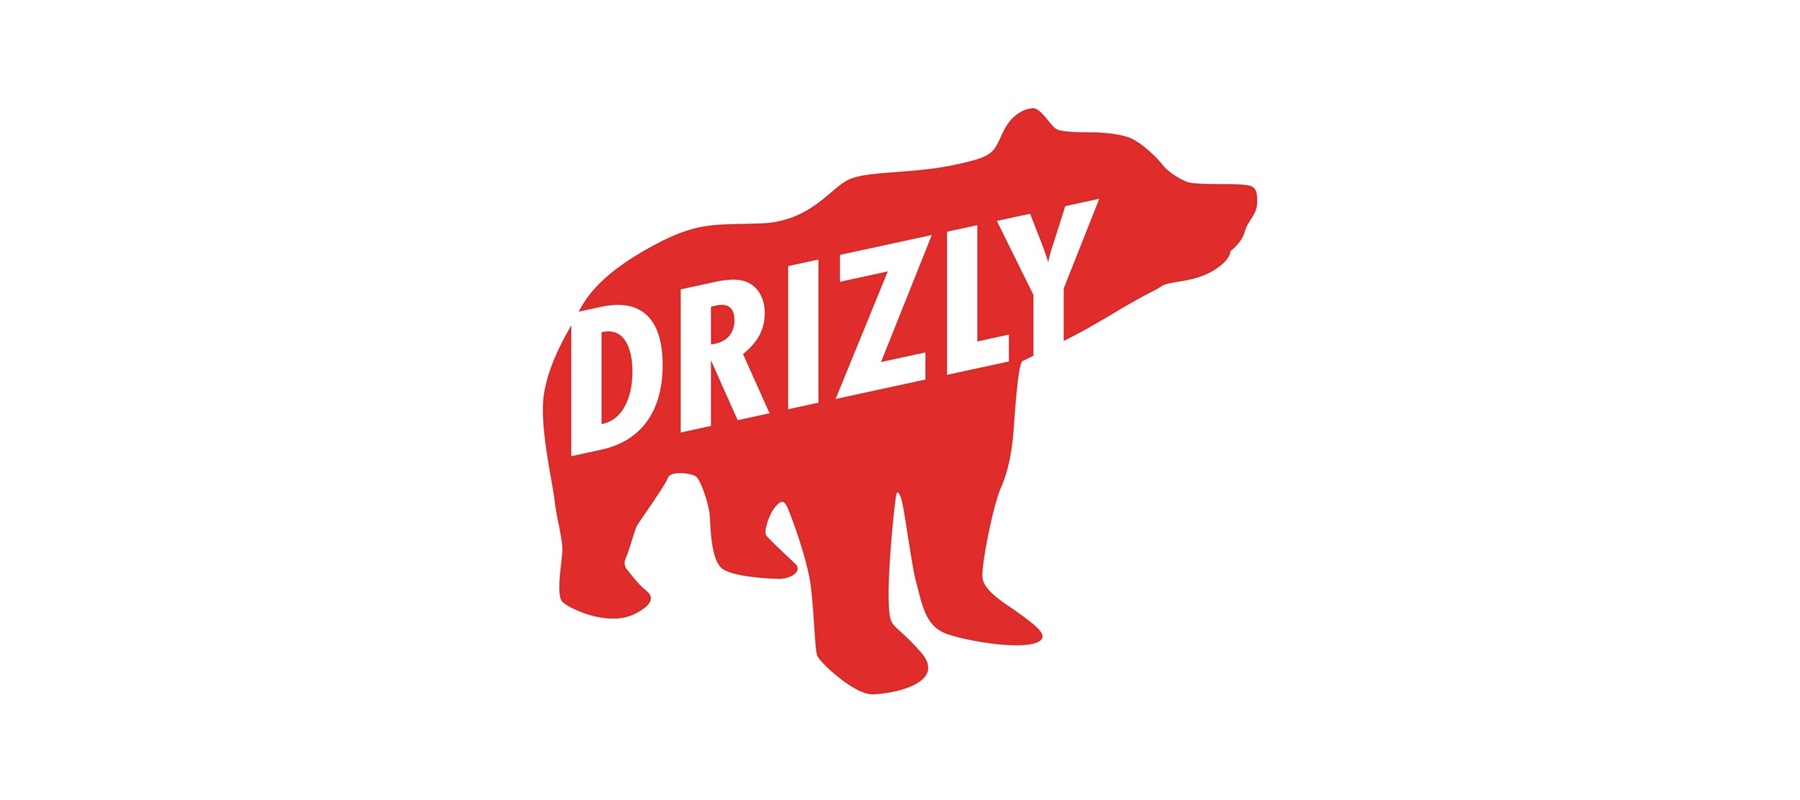 Uber company Drizly debuts new marketing campaign